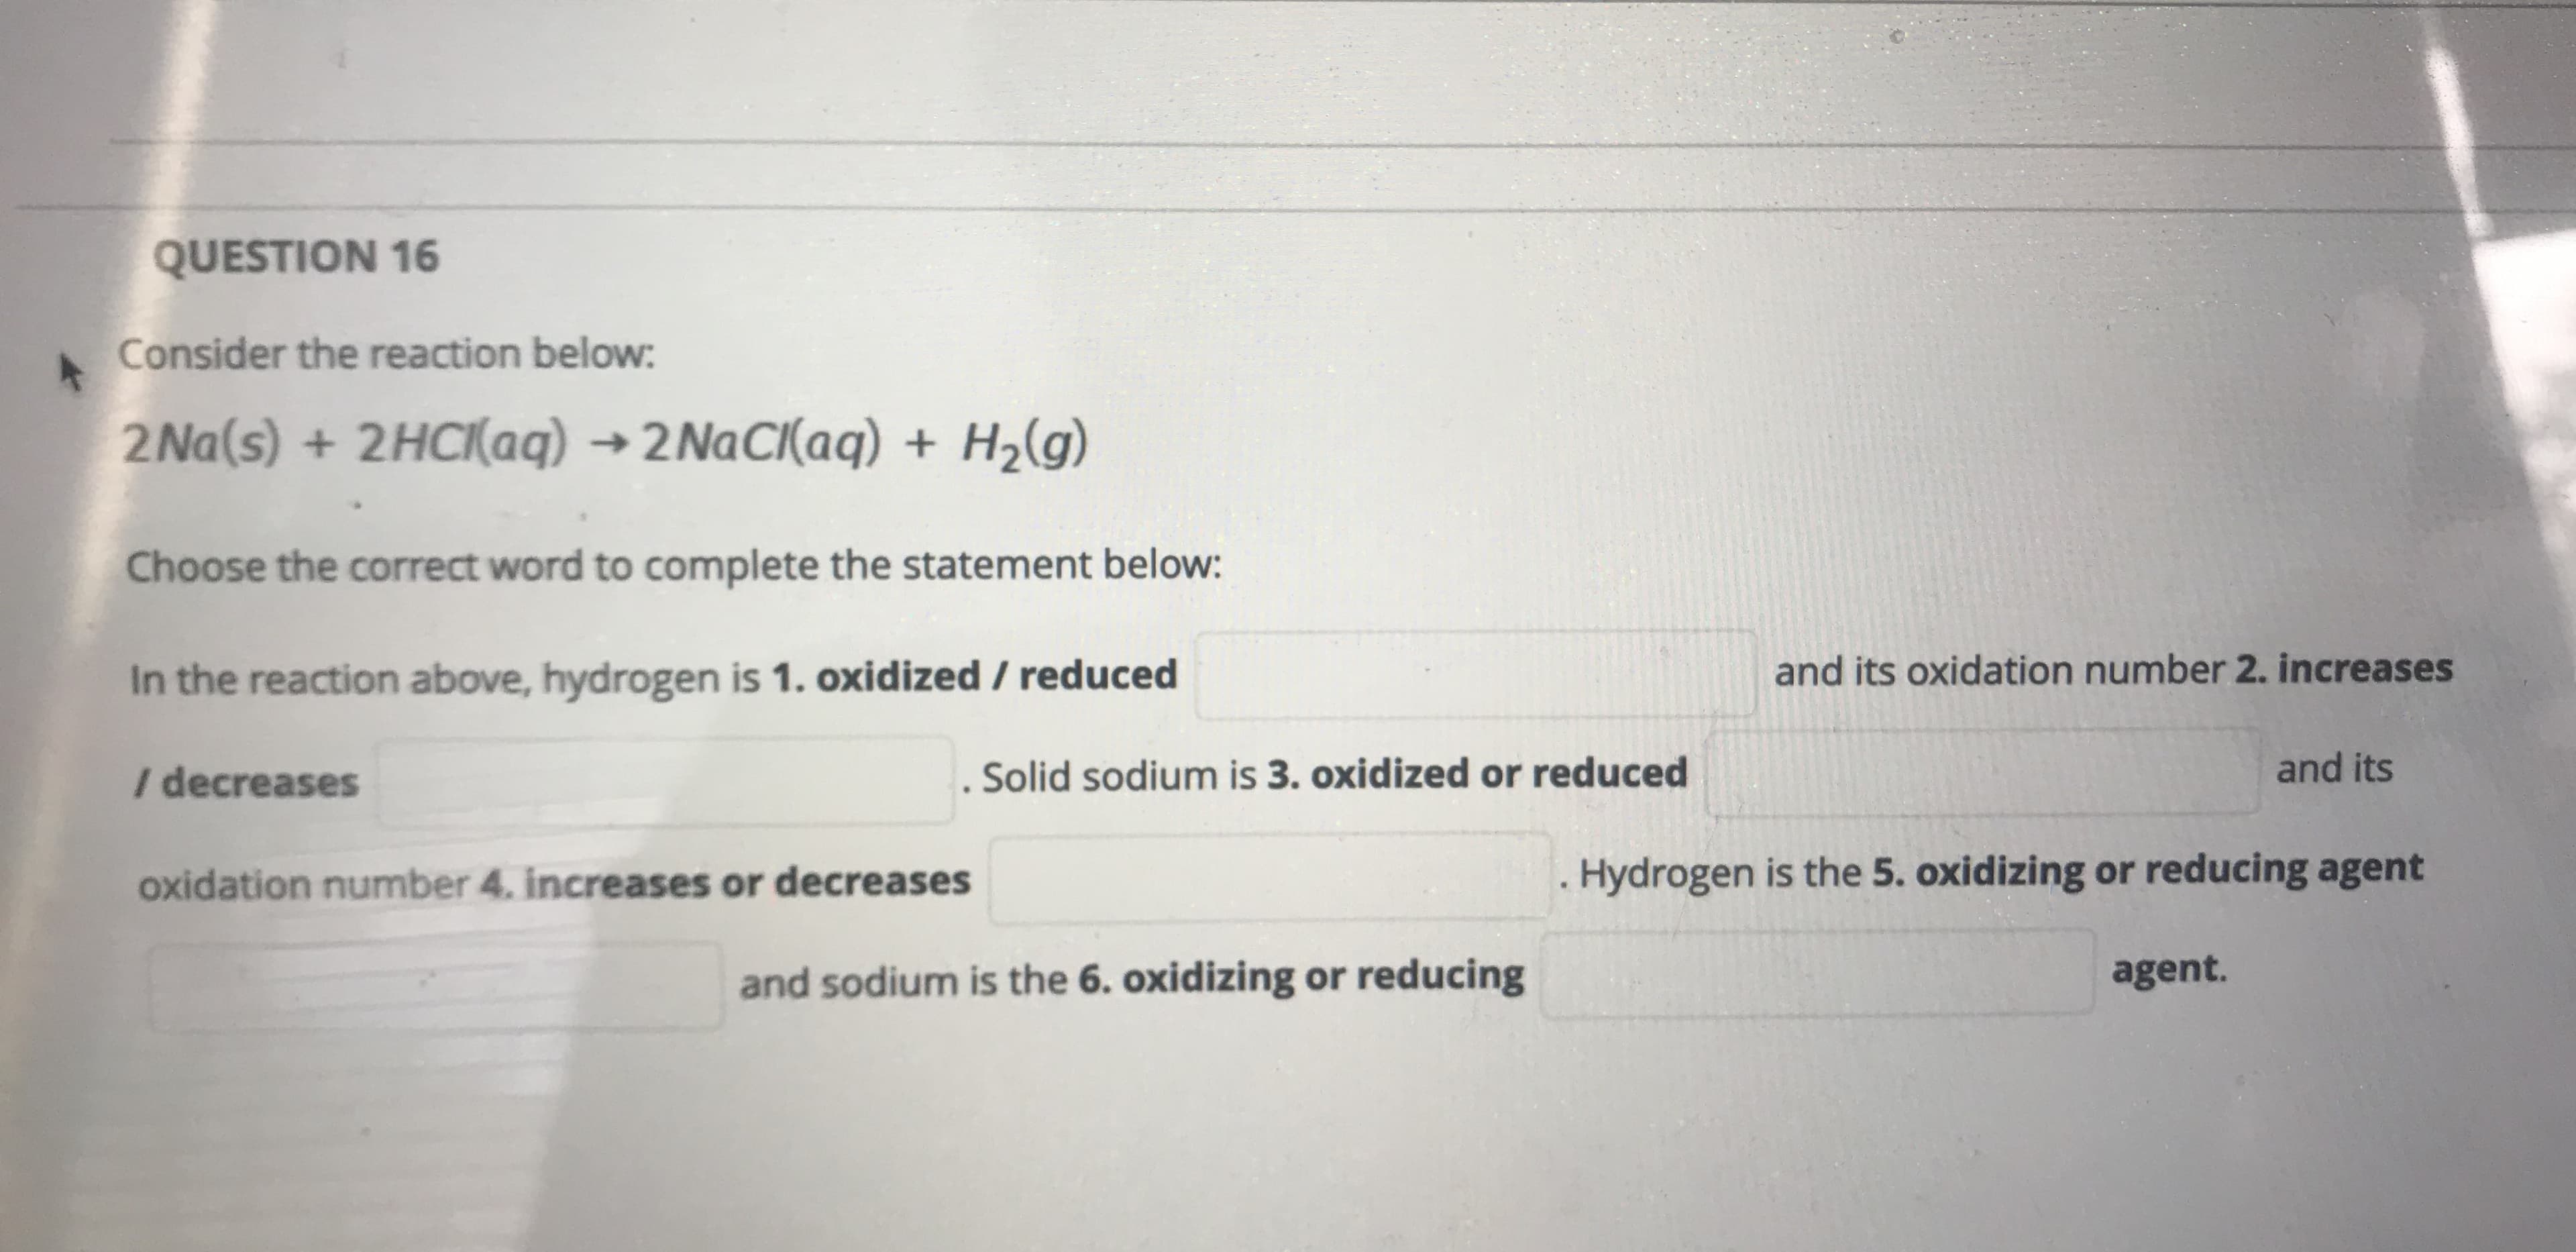 Consider the reaction below:
2 Na(s) + 2HCI(aq) → 2NaCI(aq) + H2(g)
Choose the correct word to complete the statement below:
In the reaction above, hydrogen is 1. oxidized / reduced
and its oxidation number 2. increases
I decreases
. Solid sodium is 3. oxidized or reduced
and its
oxidation number 4. increases or decreases
Hydrogen is the 5. oxidizing or reducing agent
and sodium is the 6. oxidizing or reducing
agent.
